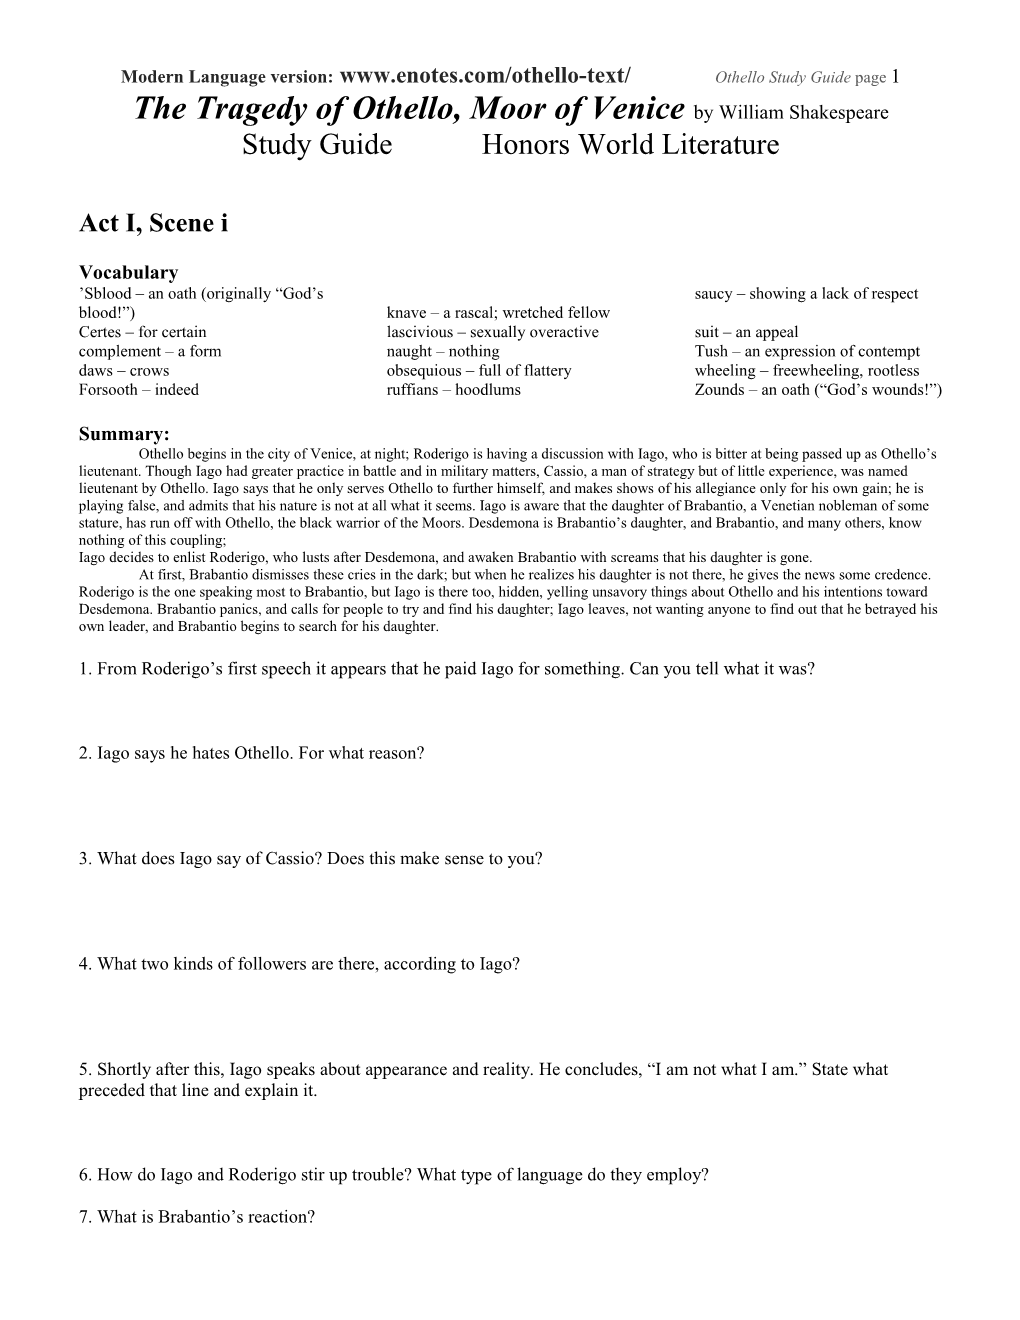 Modern Language Version: Othello Study Guide Page 1